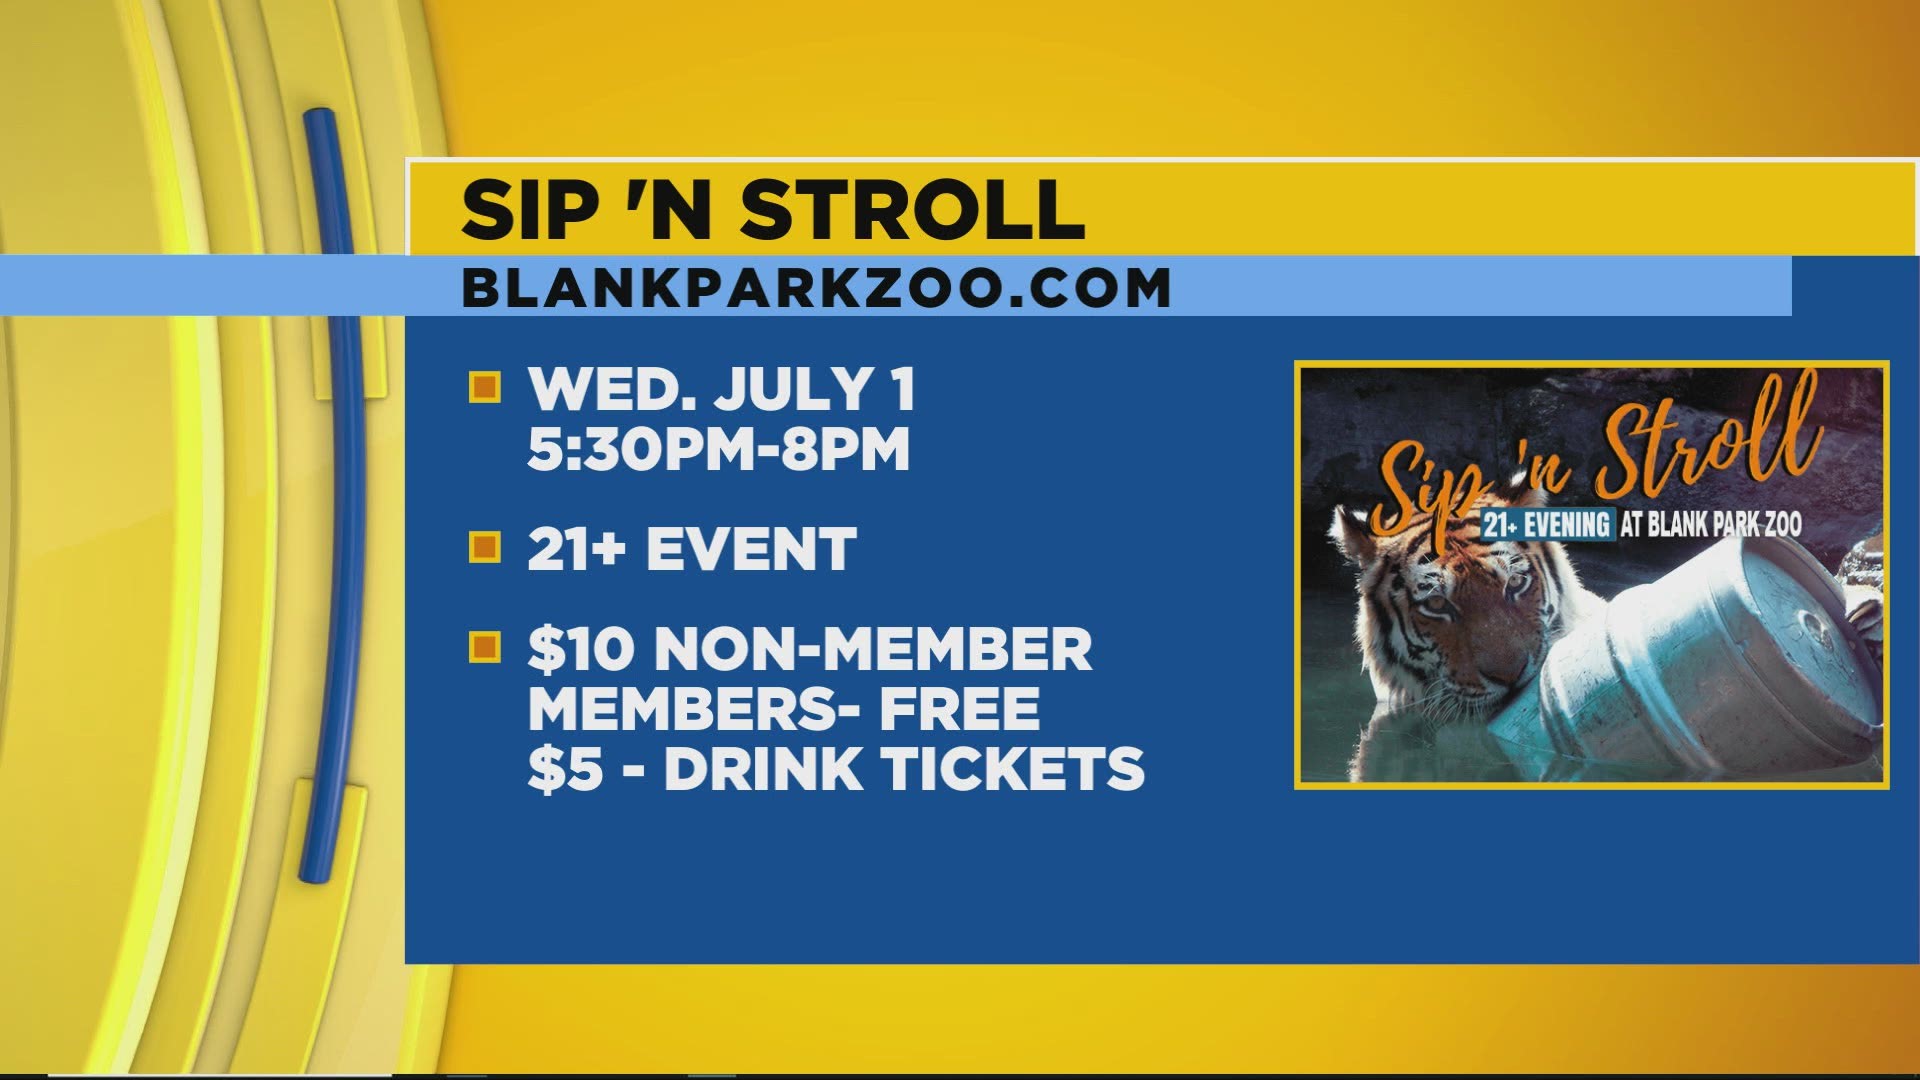 The Blank Park Zoo's Sip 'n Stroll is tonight at 5:30pm